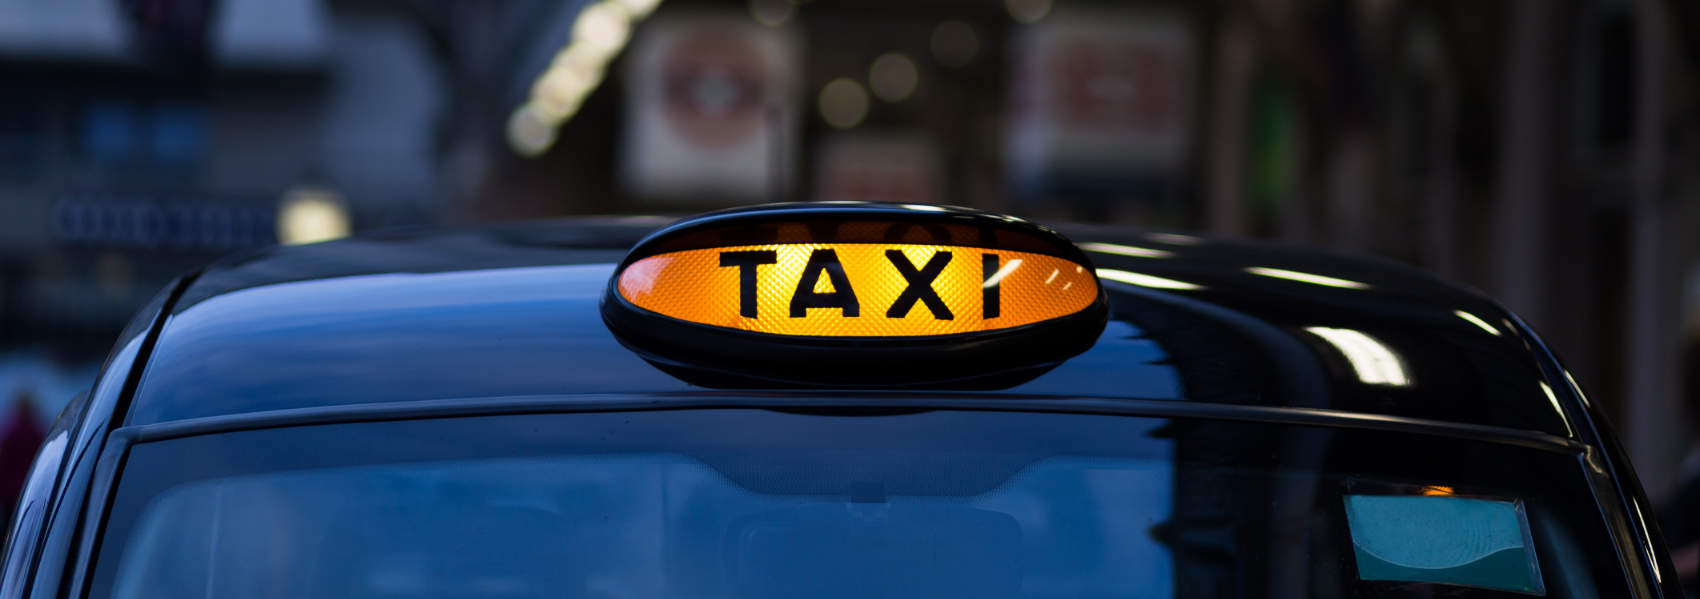 Taxi and private hire drivers to face enhanced checks